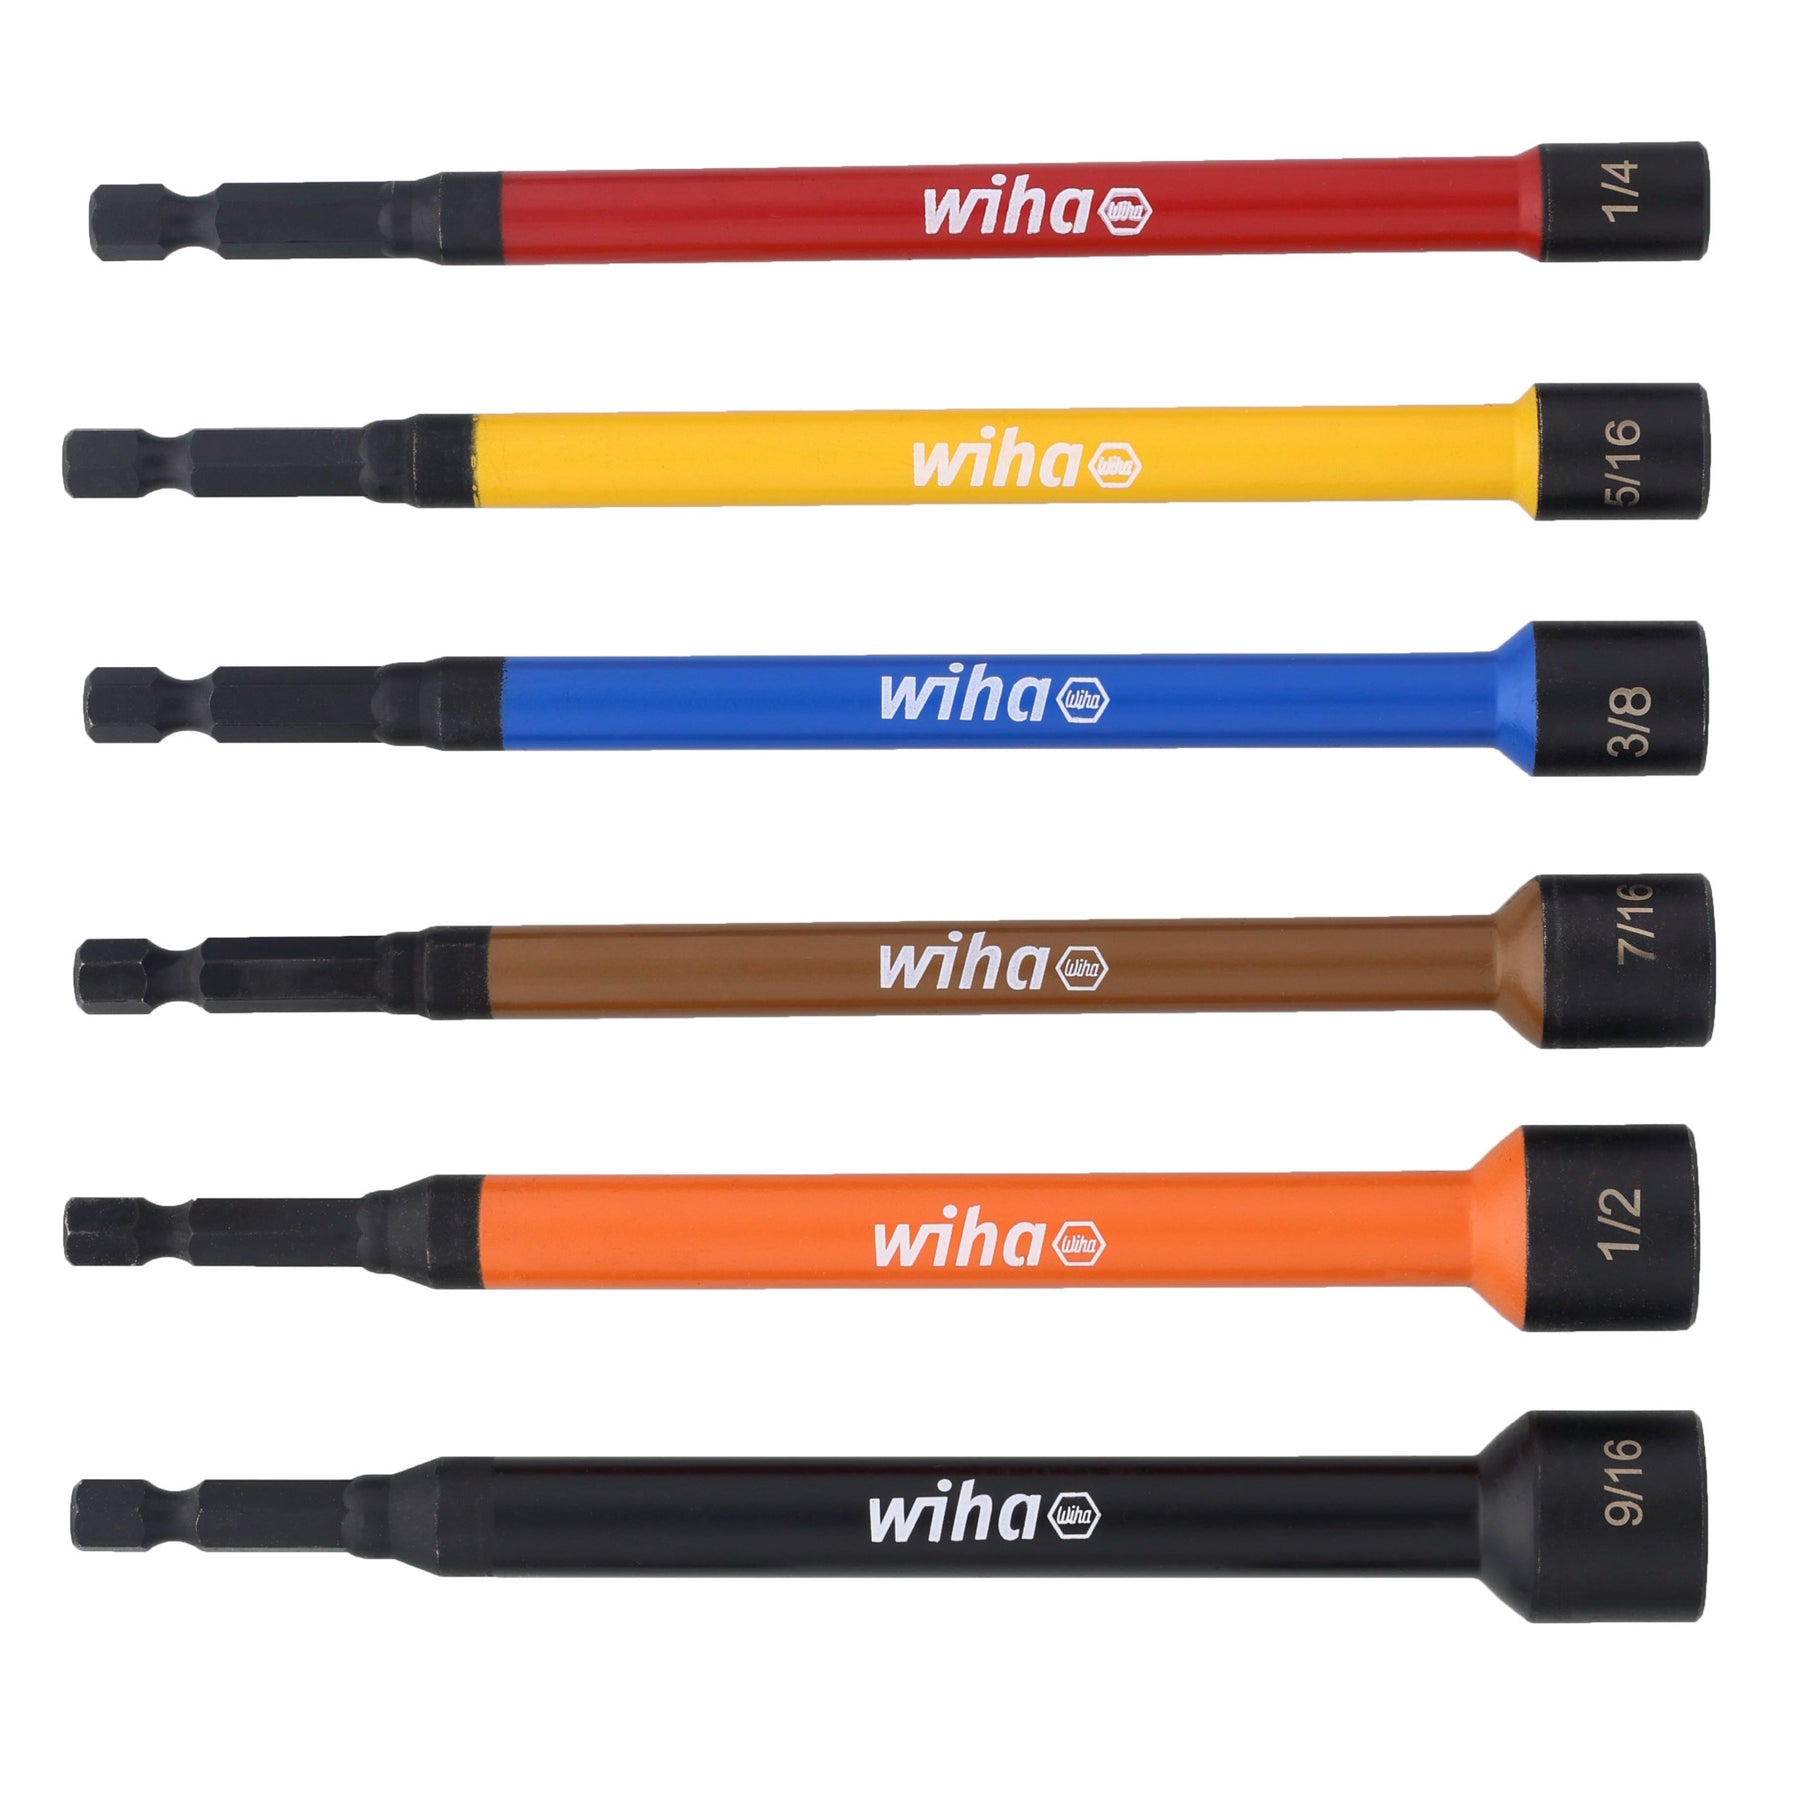 Wiha 70486 6 Piece Color Coded Magnetic Nut Setter SAE Set